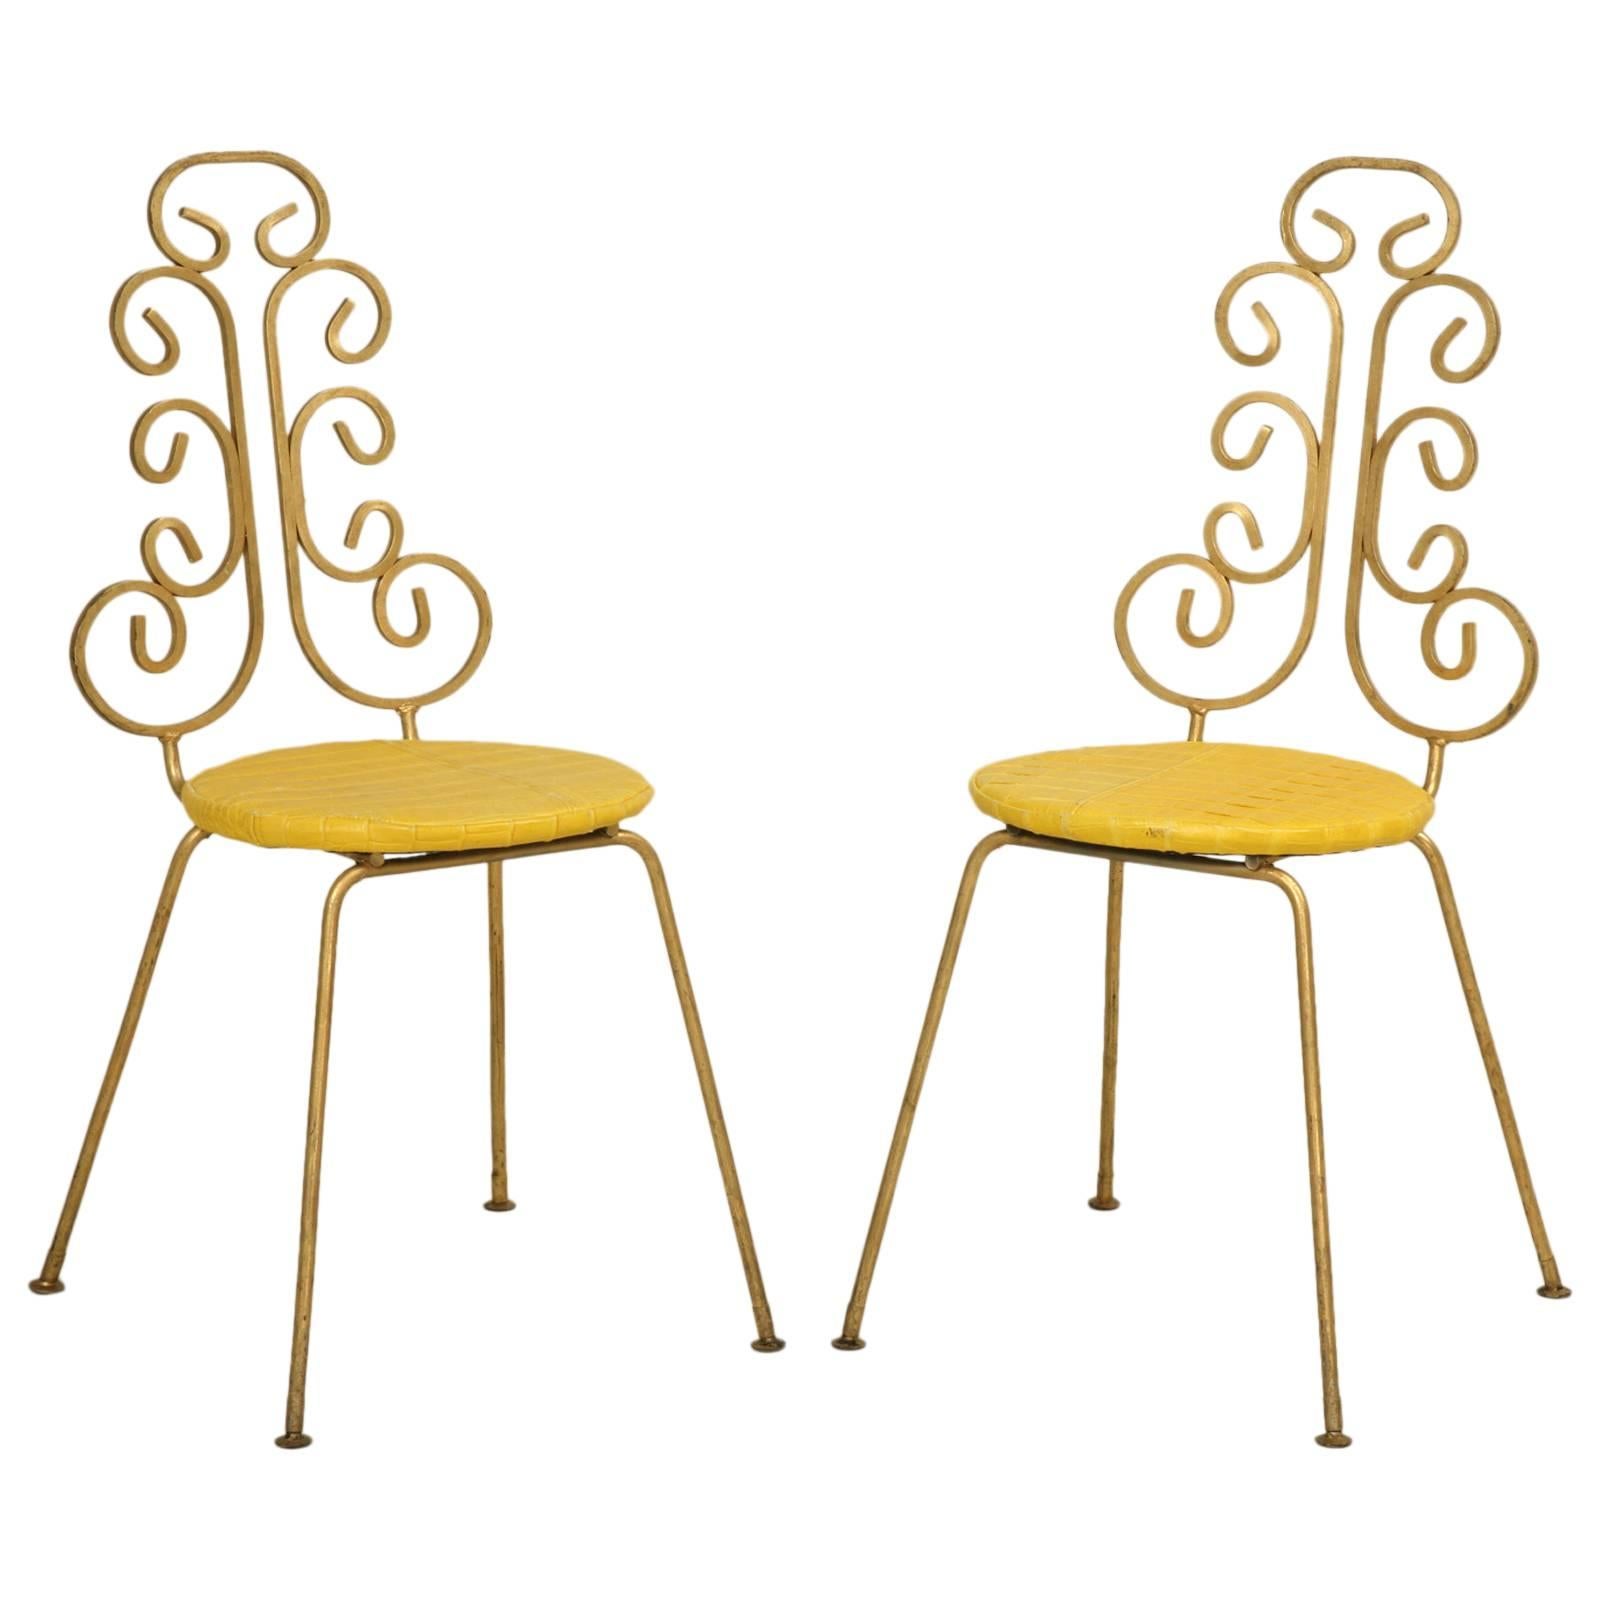 French Gilded Pair of Steel Chairs